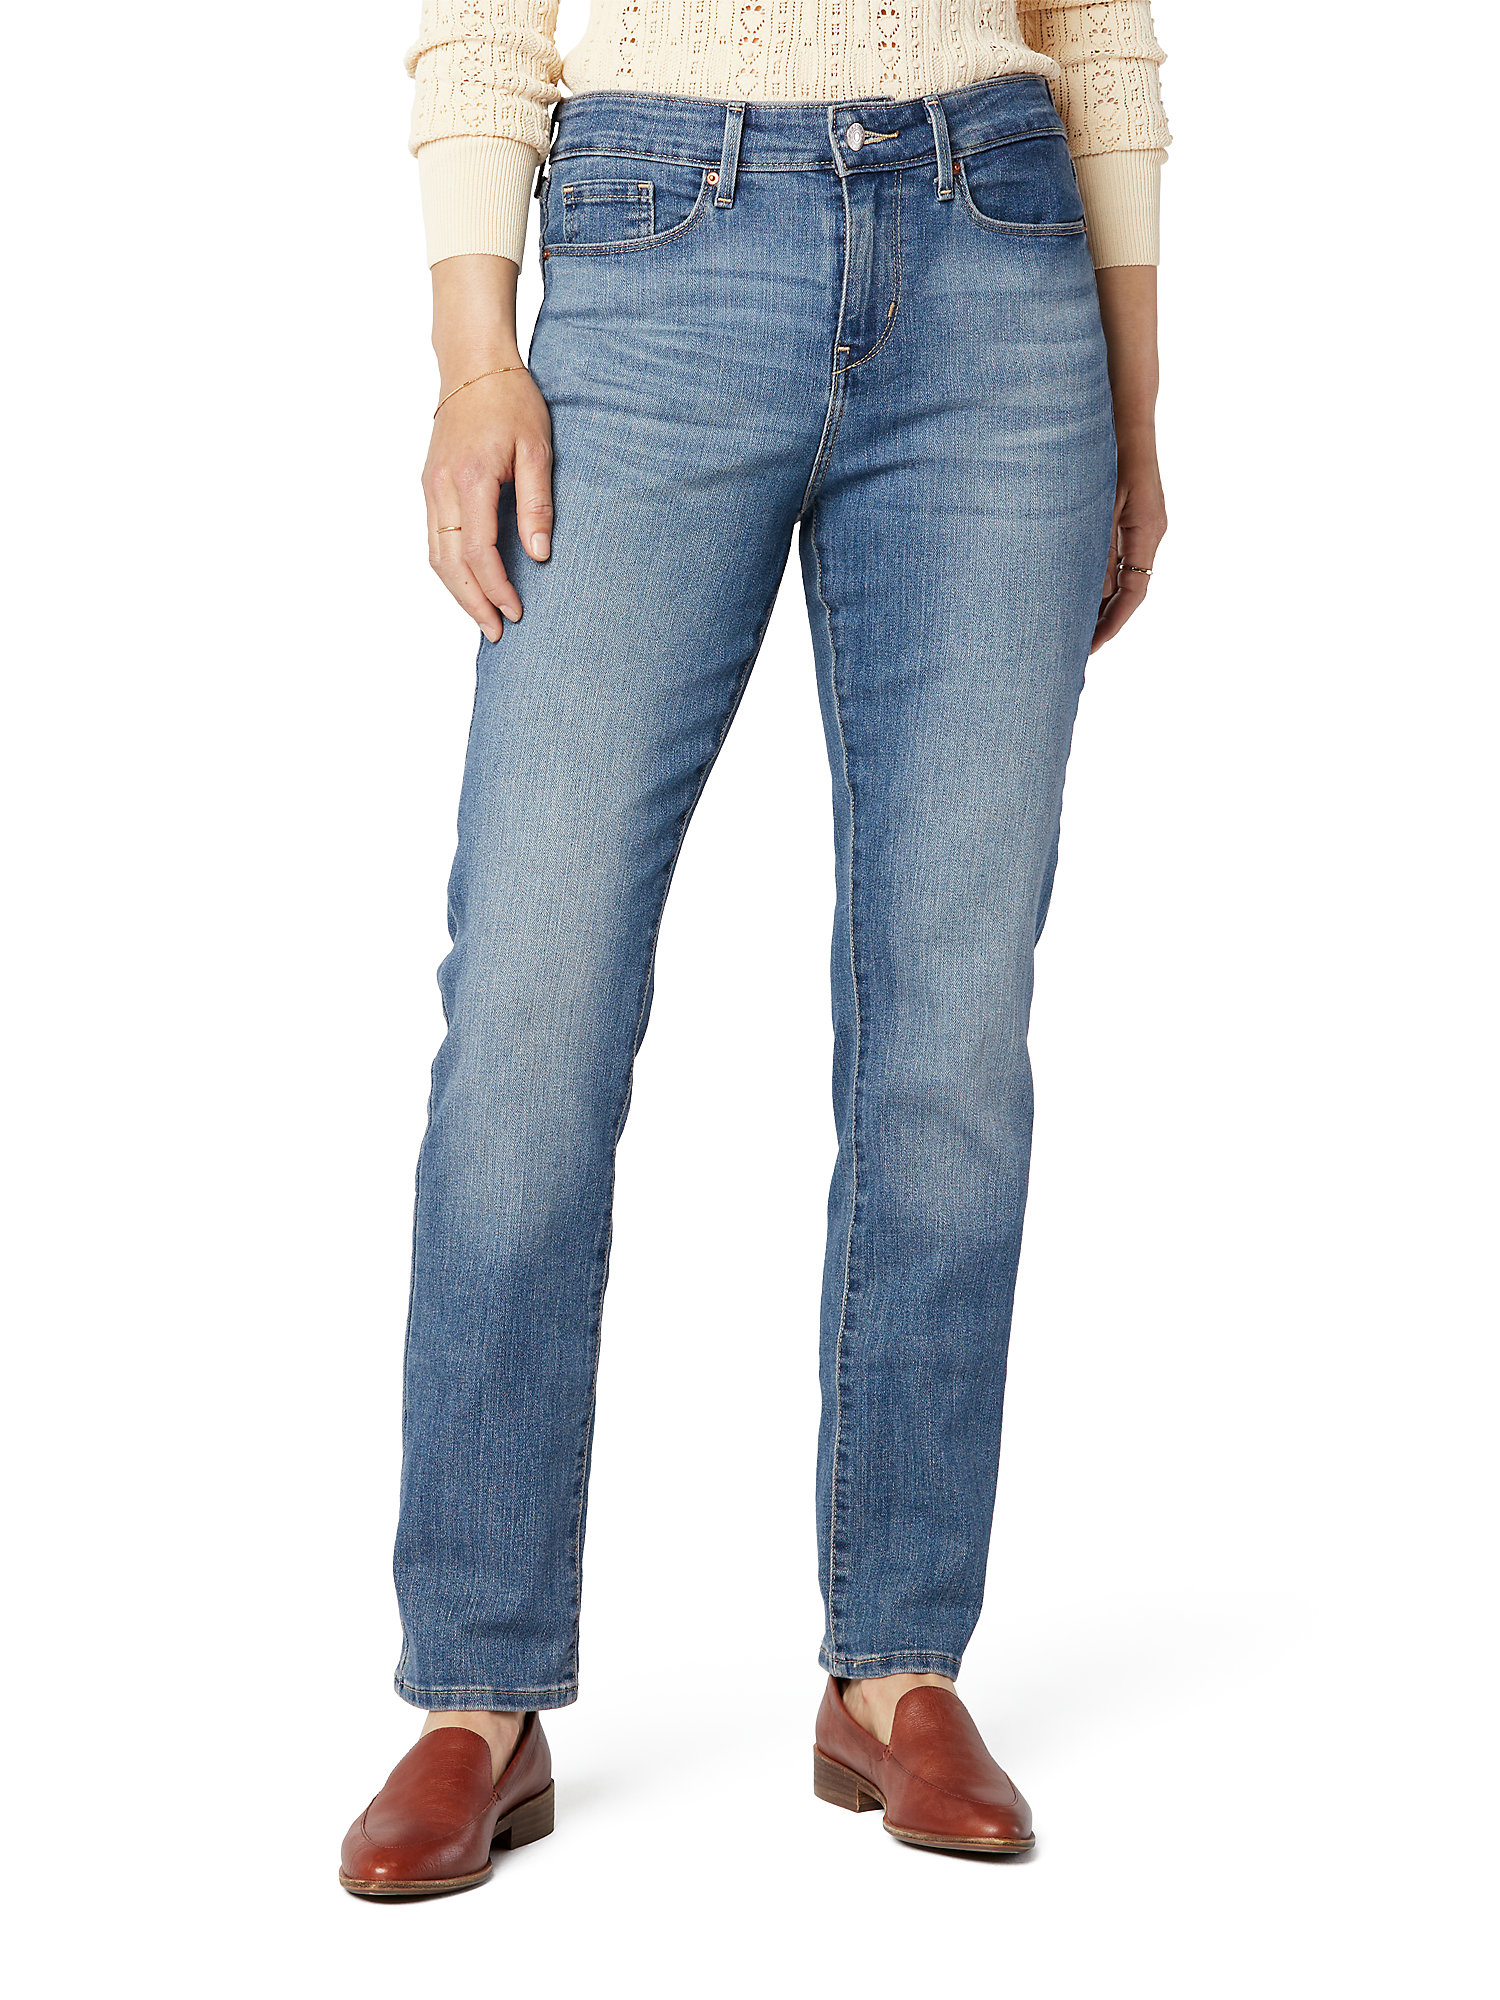 Signature by Levi Strauss & Co. Women's and Women's Plus Size Mid Rise Modern Straight Jeans, Sizes 2-28 - image 1 of 5